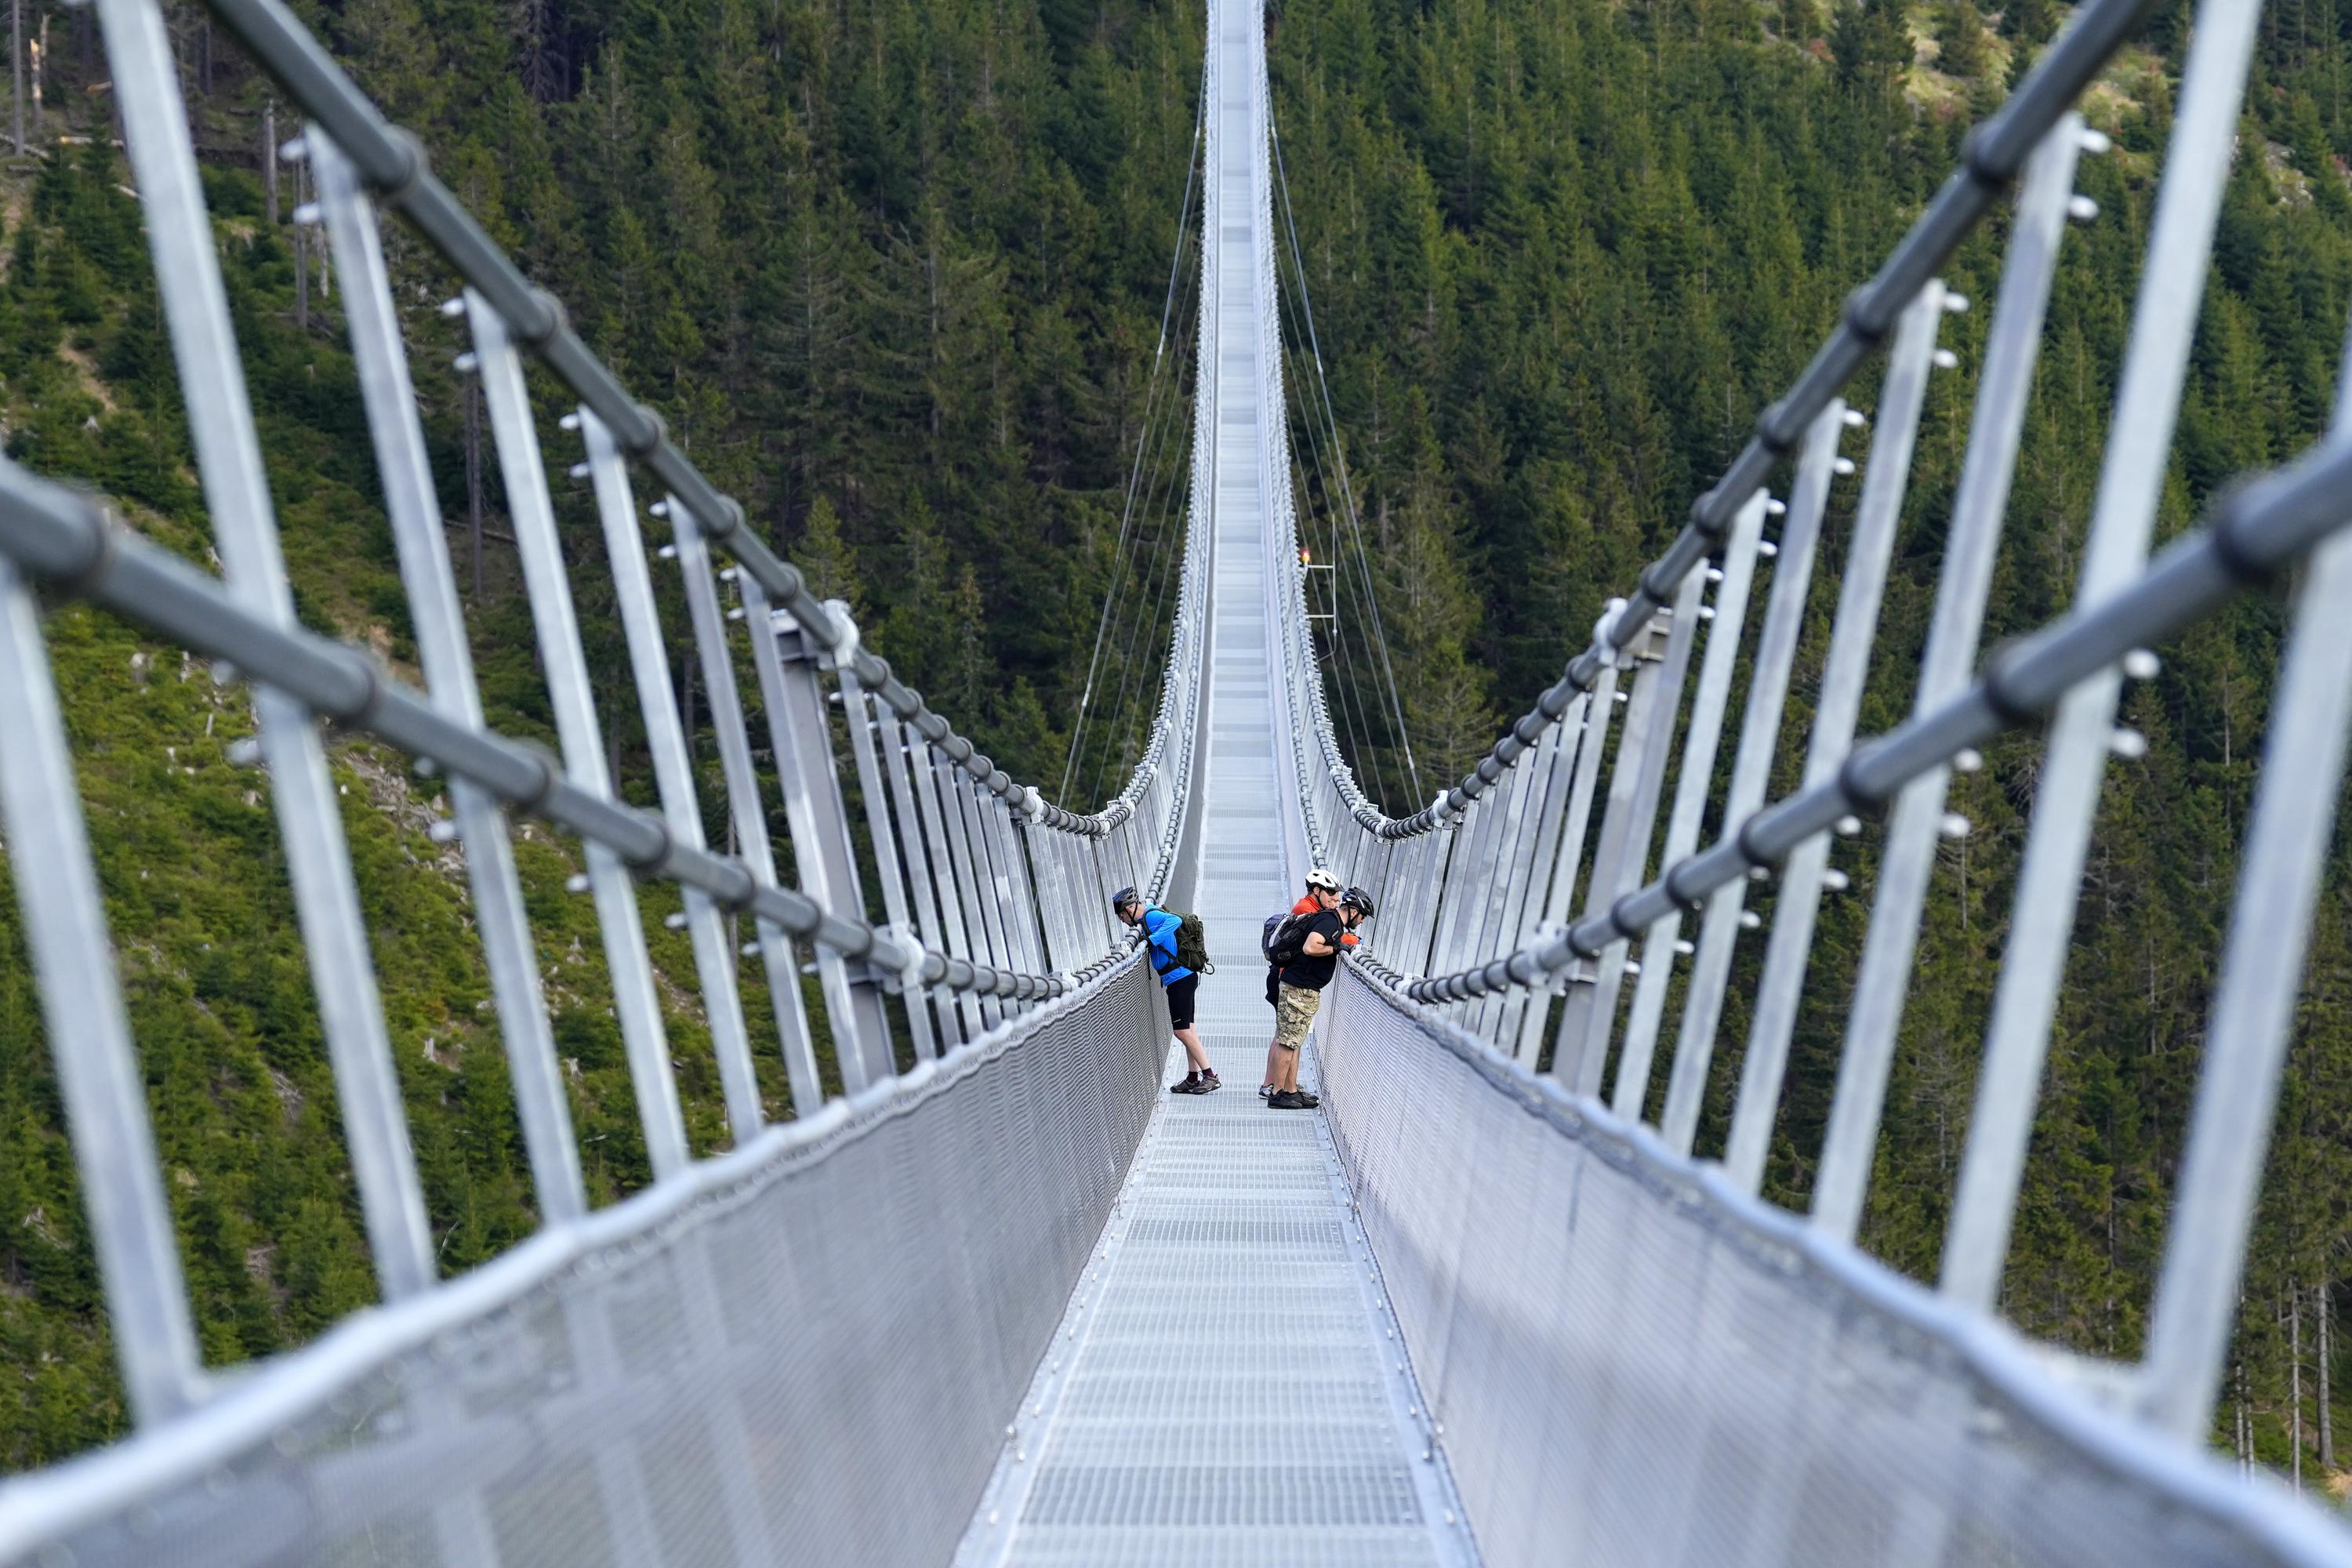 DOLNI MORAVA, Czech Republic (AP) — A pedestrian suspension bridge that is the longest such construction in the world has opened at a mountain resor